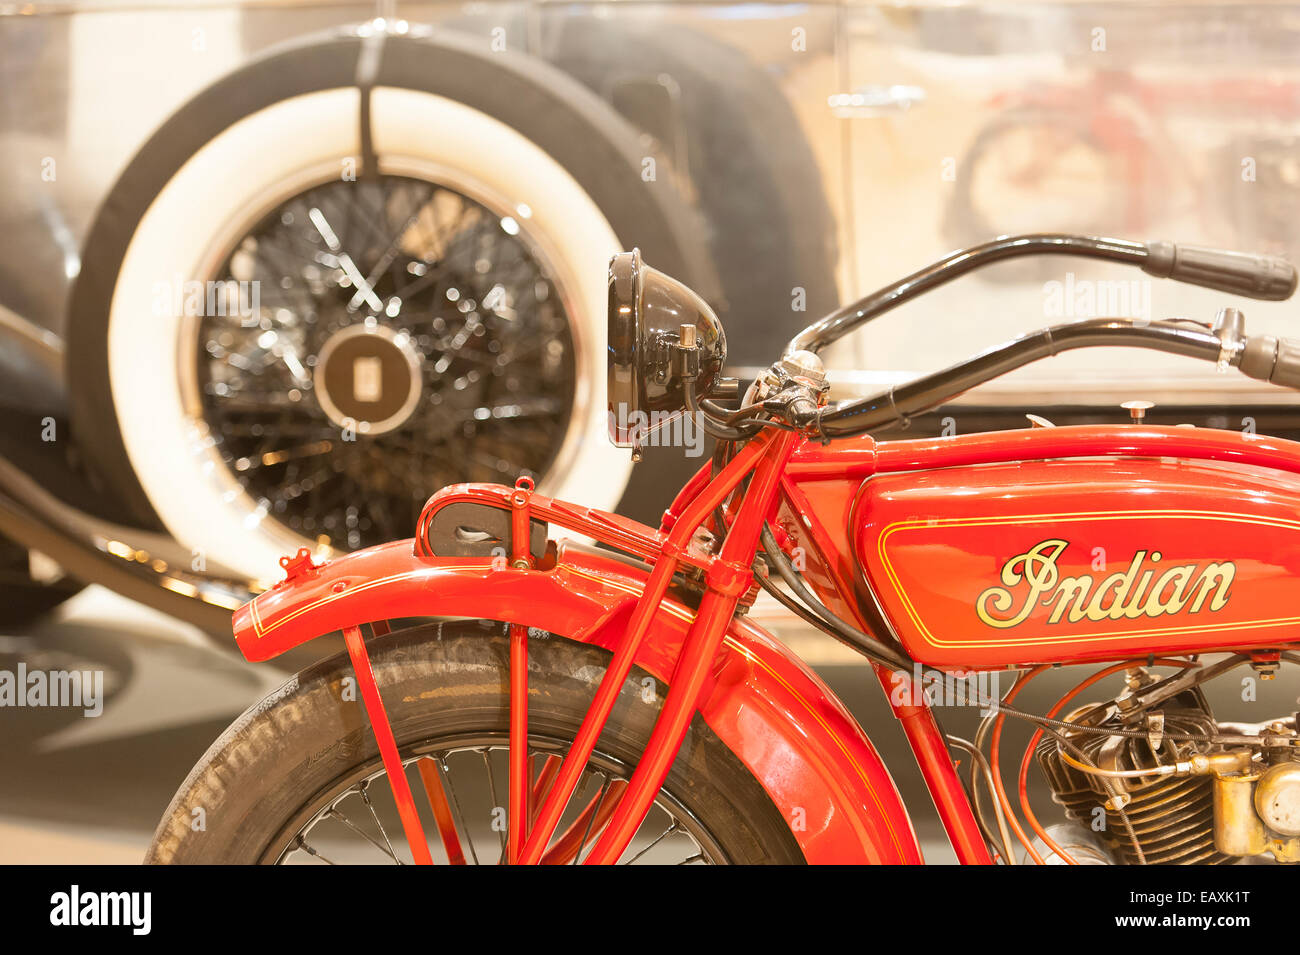 Madrid, Spain. 20th Nov, 2014. Vintage motorbike against a Rolls Royce, Pueche vintage cars stand, Feriarte art and antiques Fair, 38th edition from November 15th to 23th 2014, Ifema fair center, Madrid, Spain. Credit:  Emanuele Ciccomartino/Alamy Live News Stock Photo